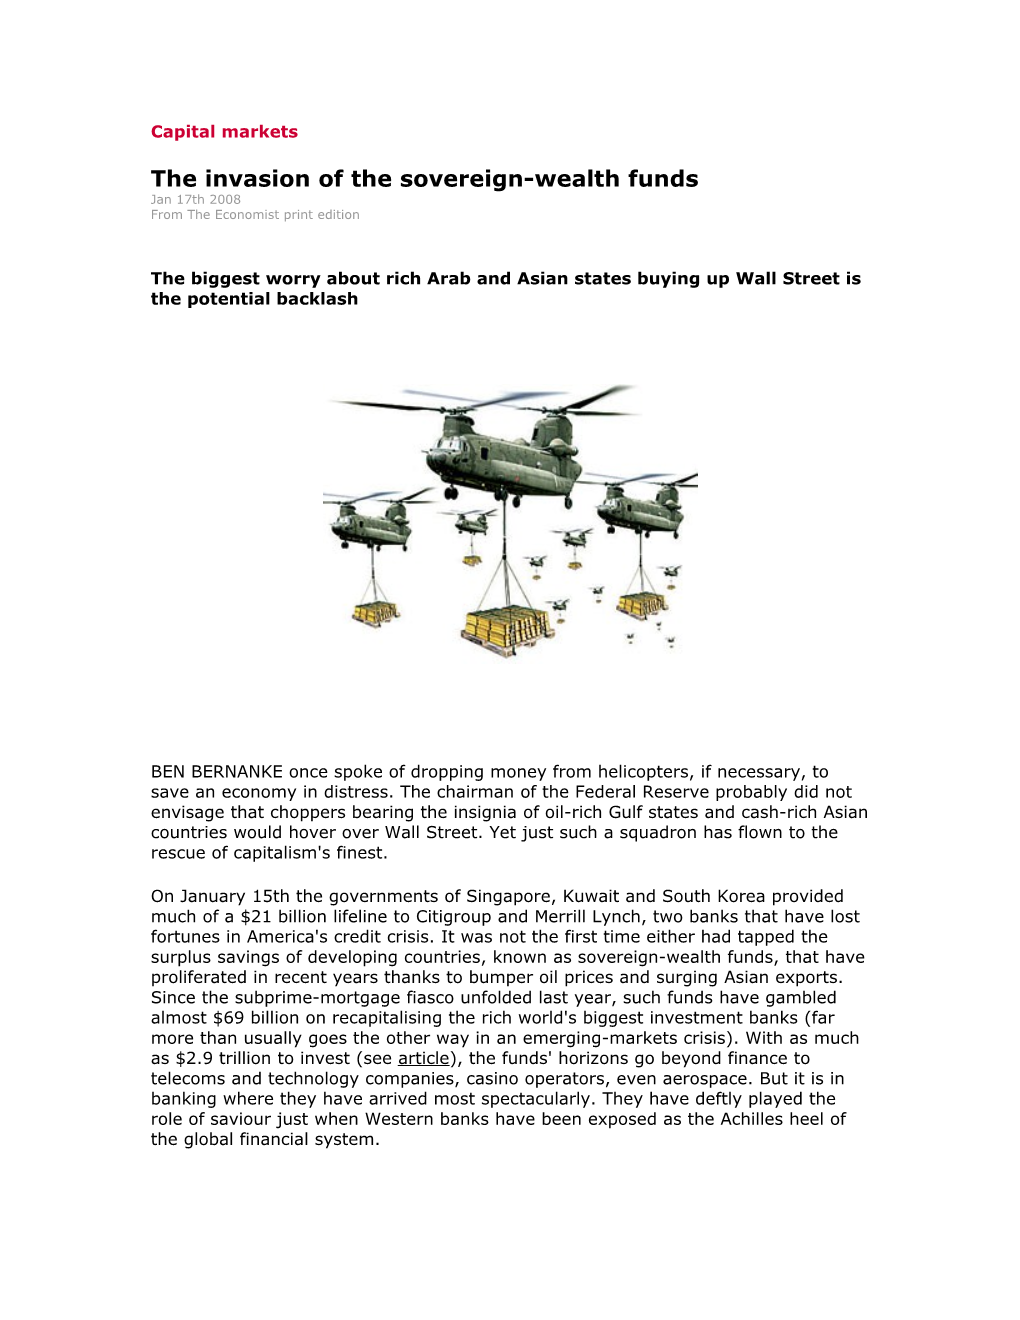 Capital Markets the Invasion of the Sovereign-Wealth Funds